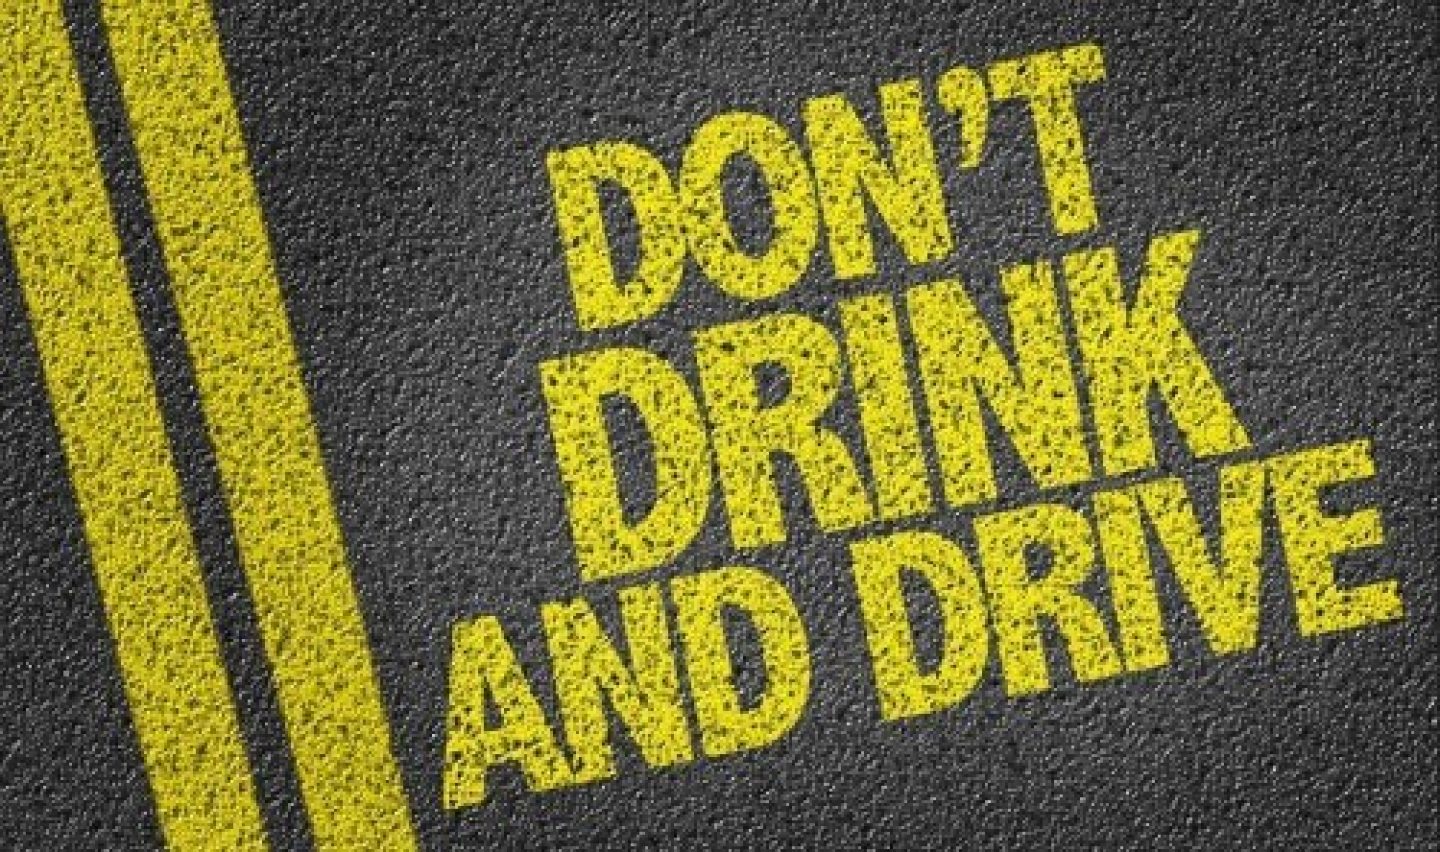 Don't drink and drive message